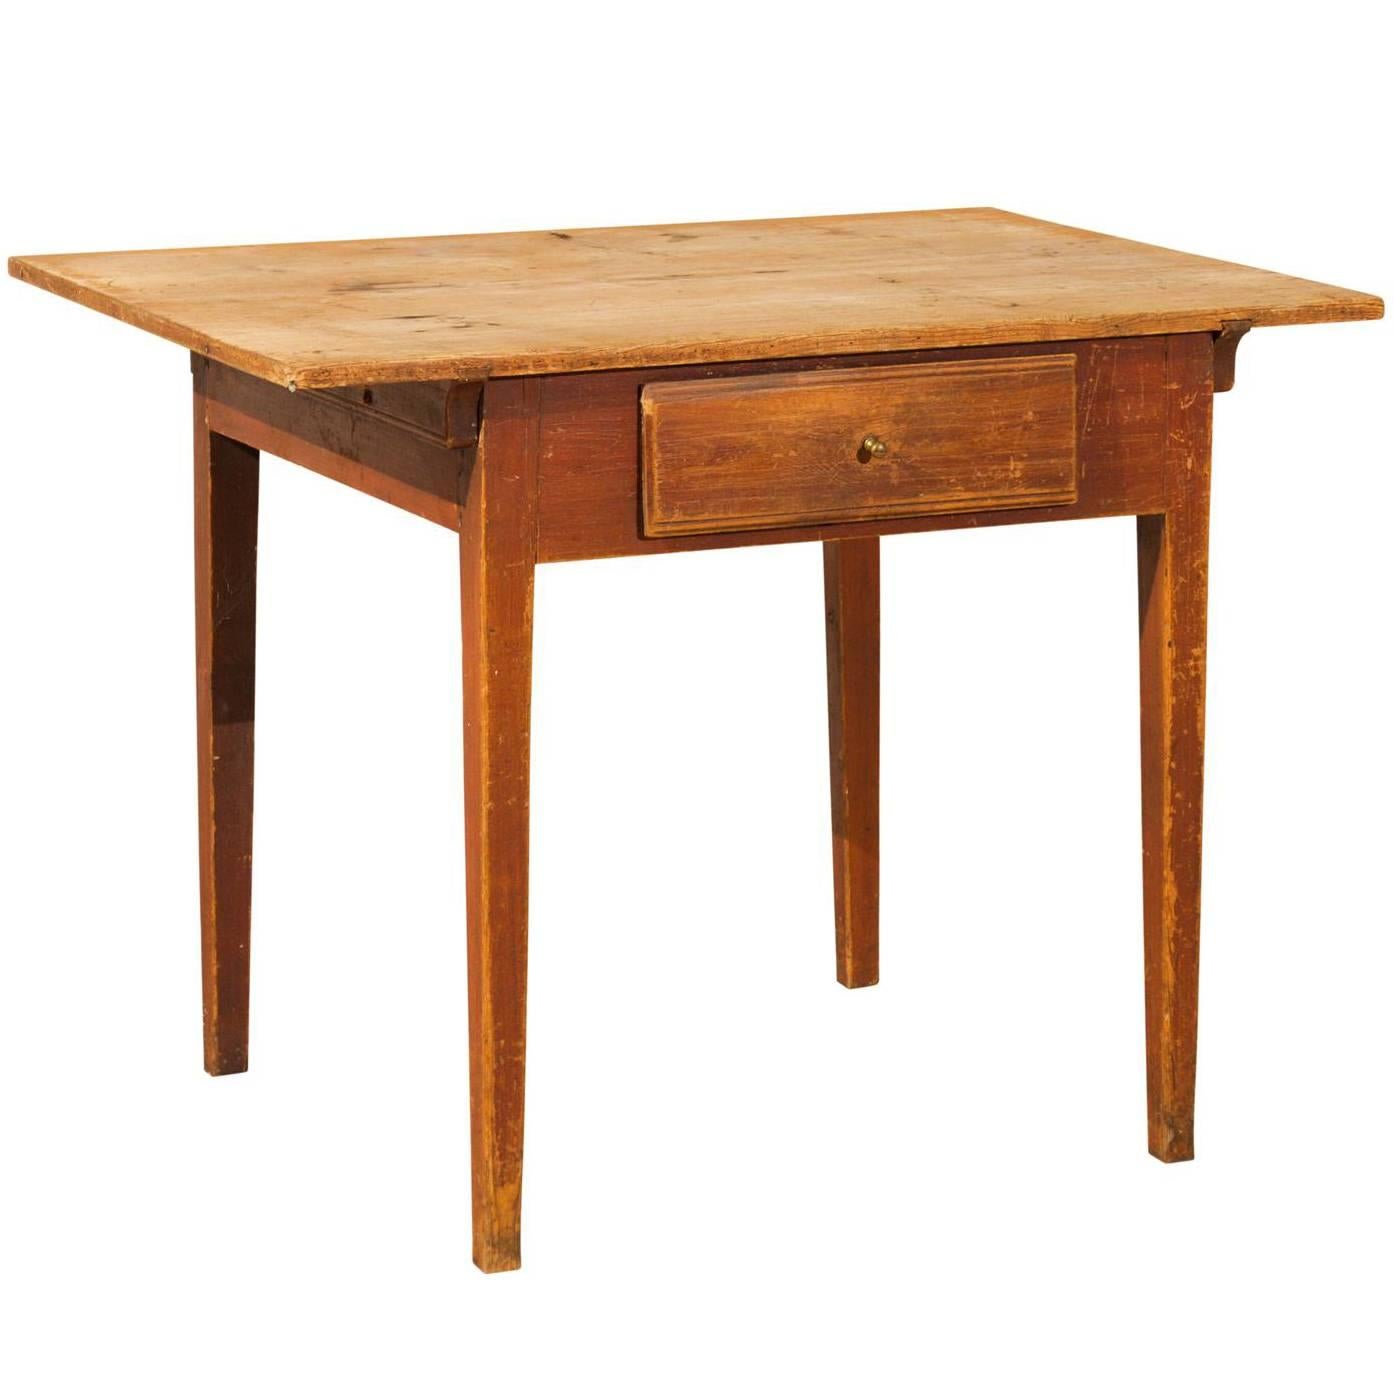 Swedish Single-Drawer Wooden Table, Clean and Simple Lines, Mid-19th Century For Sale